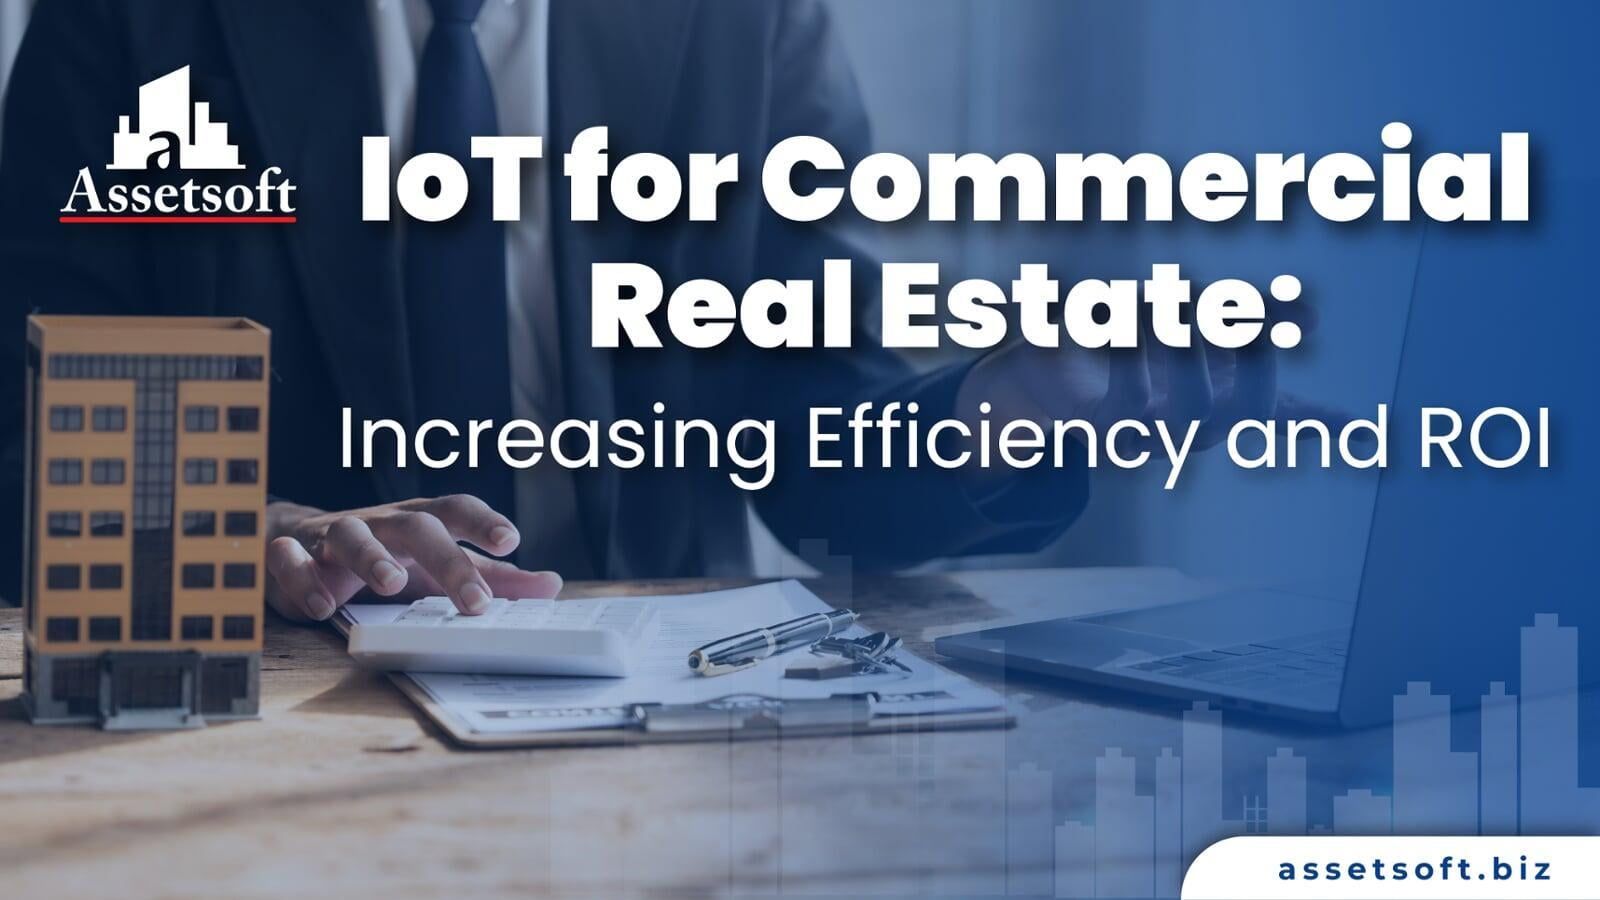 IoT for Commercial Real Estate: Increasing Efficiency and ROI 